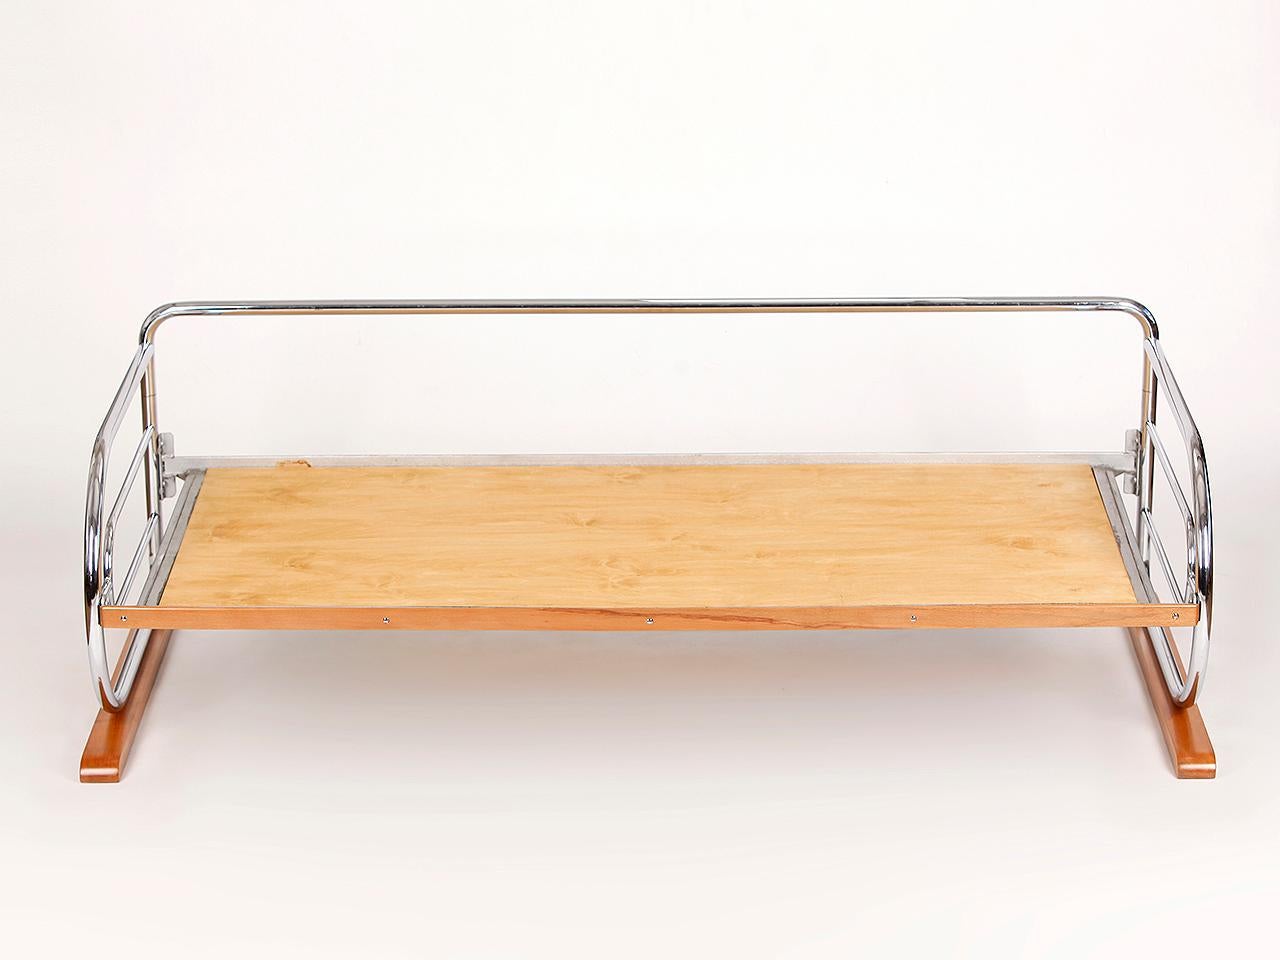 20th Century Art Deco Tubular Steel Couch Daybed from H. Gottwald, 1930s